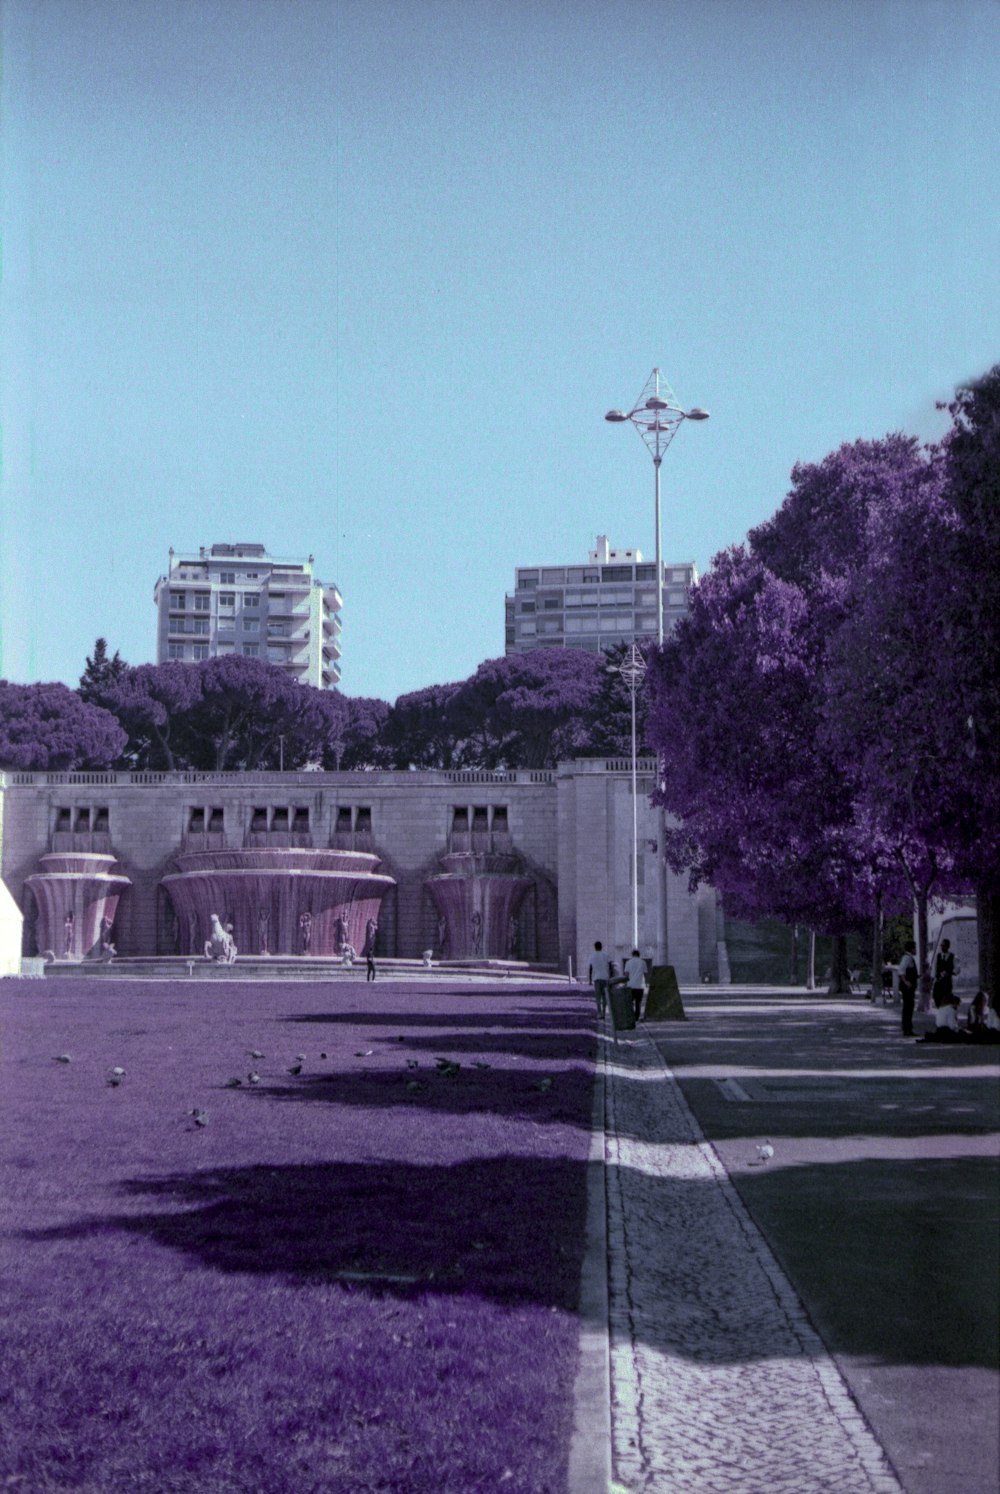 a park with purple grass and tall buildings in the background